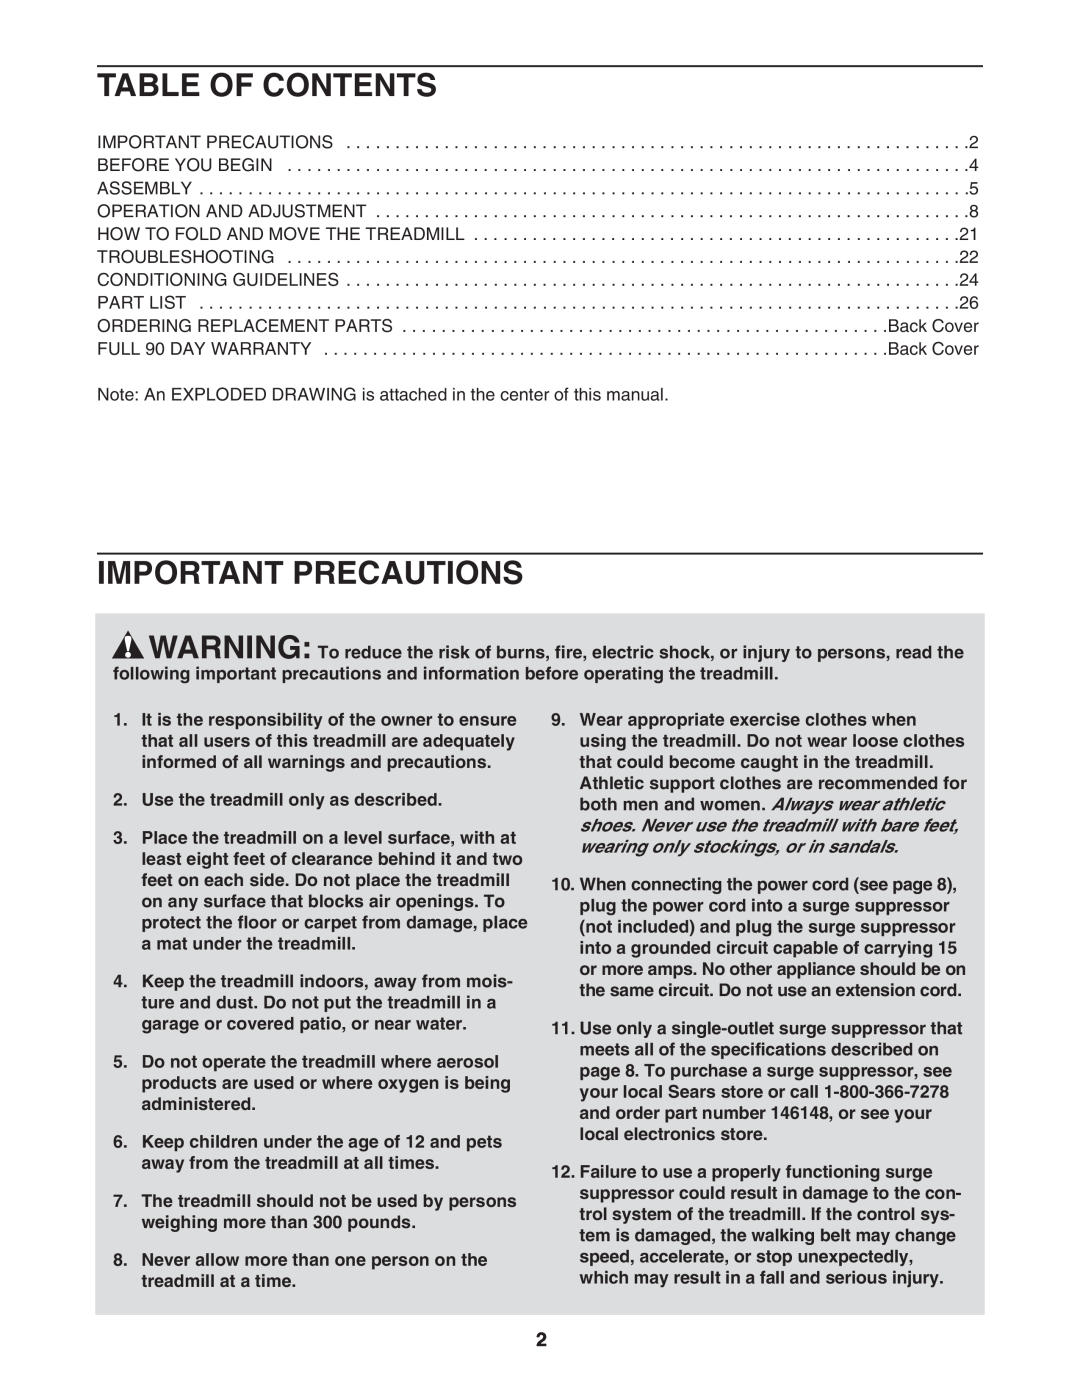 ProForm 831.29605.0 user manual Table Of Contents, Important Precautions, Use the treadmill only as described 